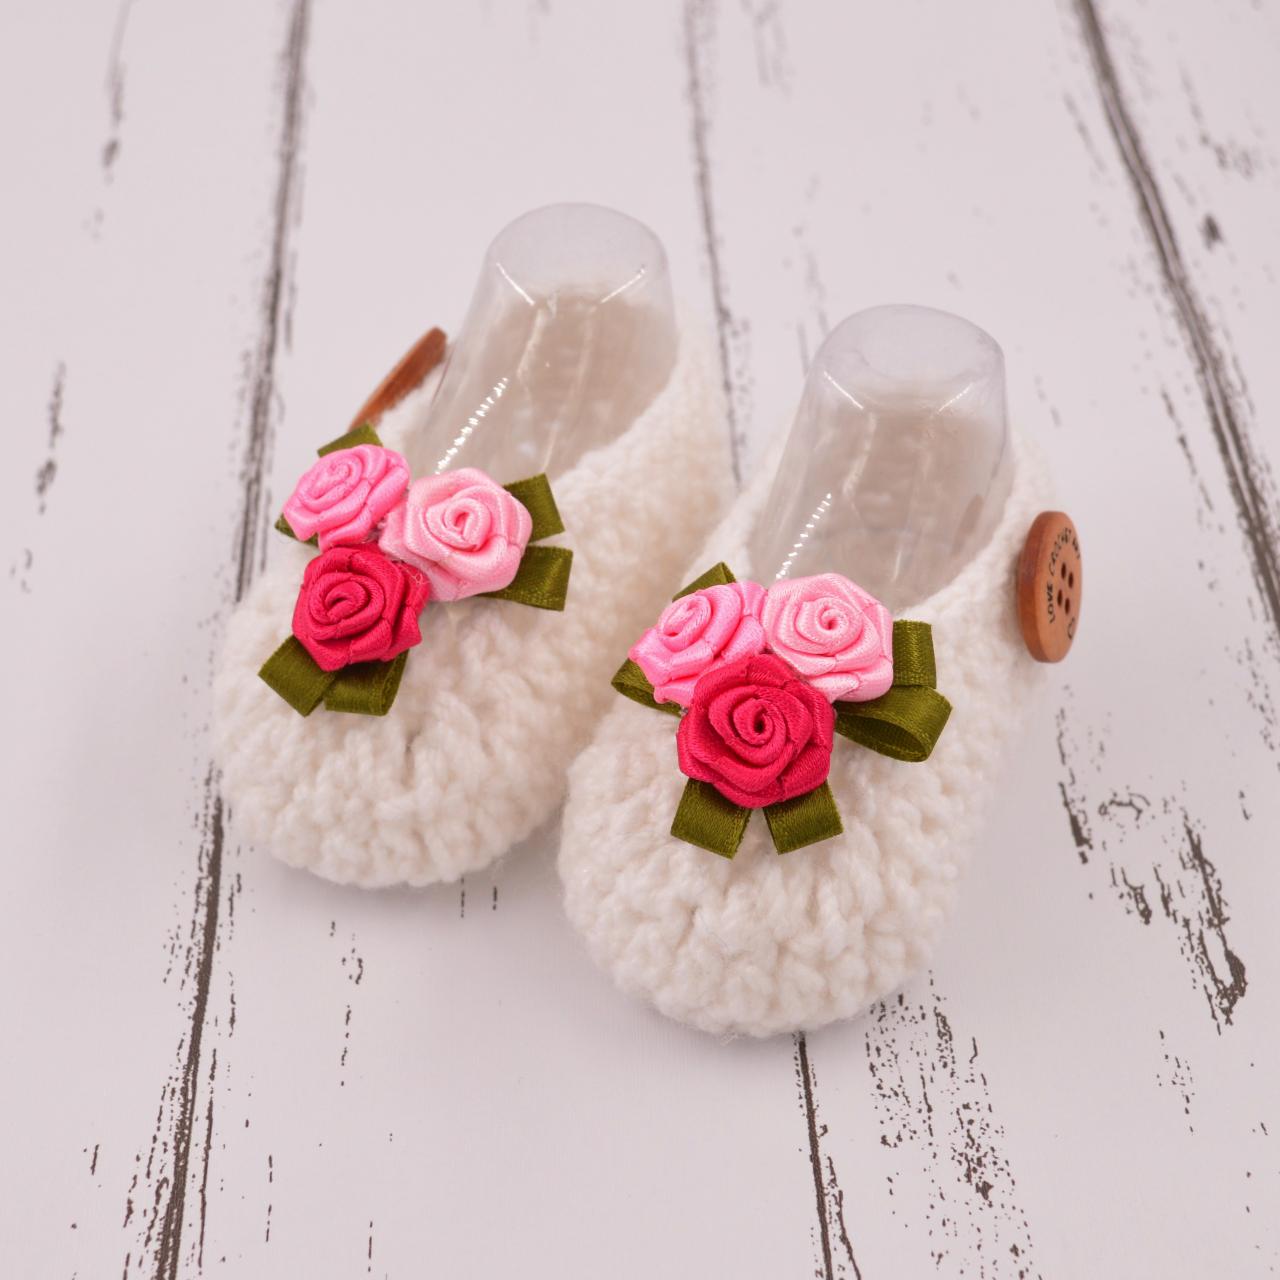 Lovely crochet baby booties with 3 flower - White